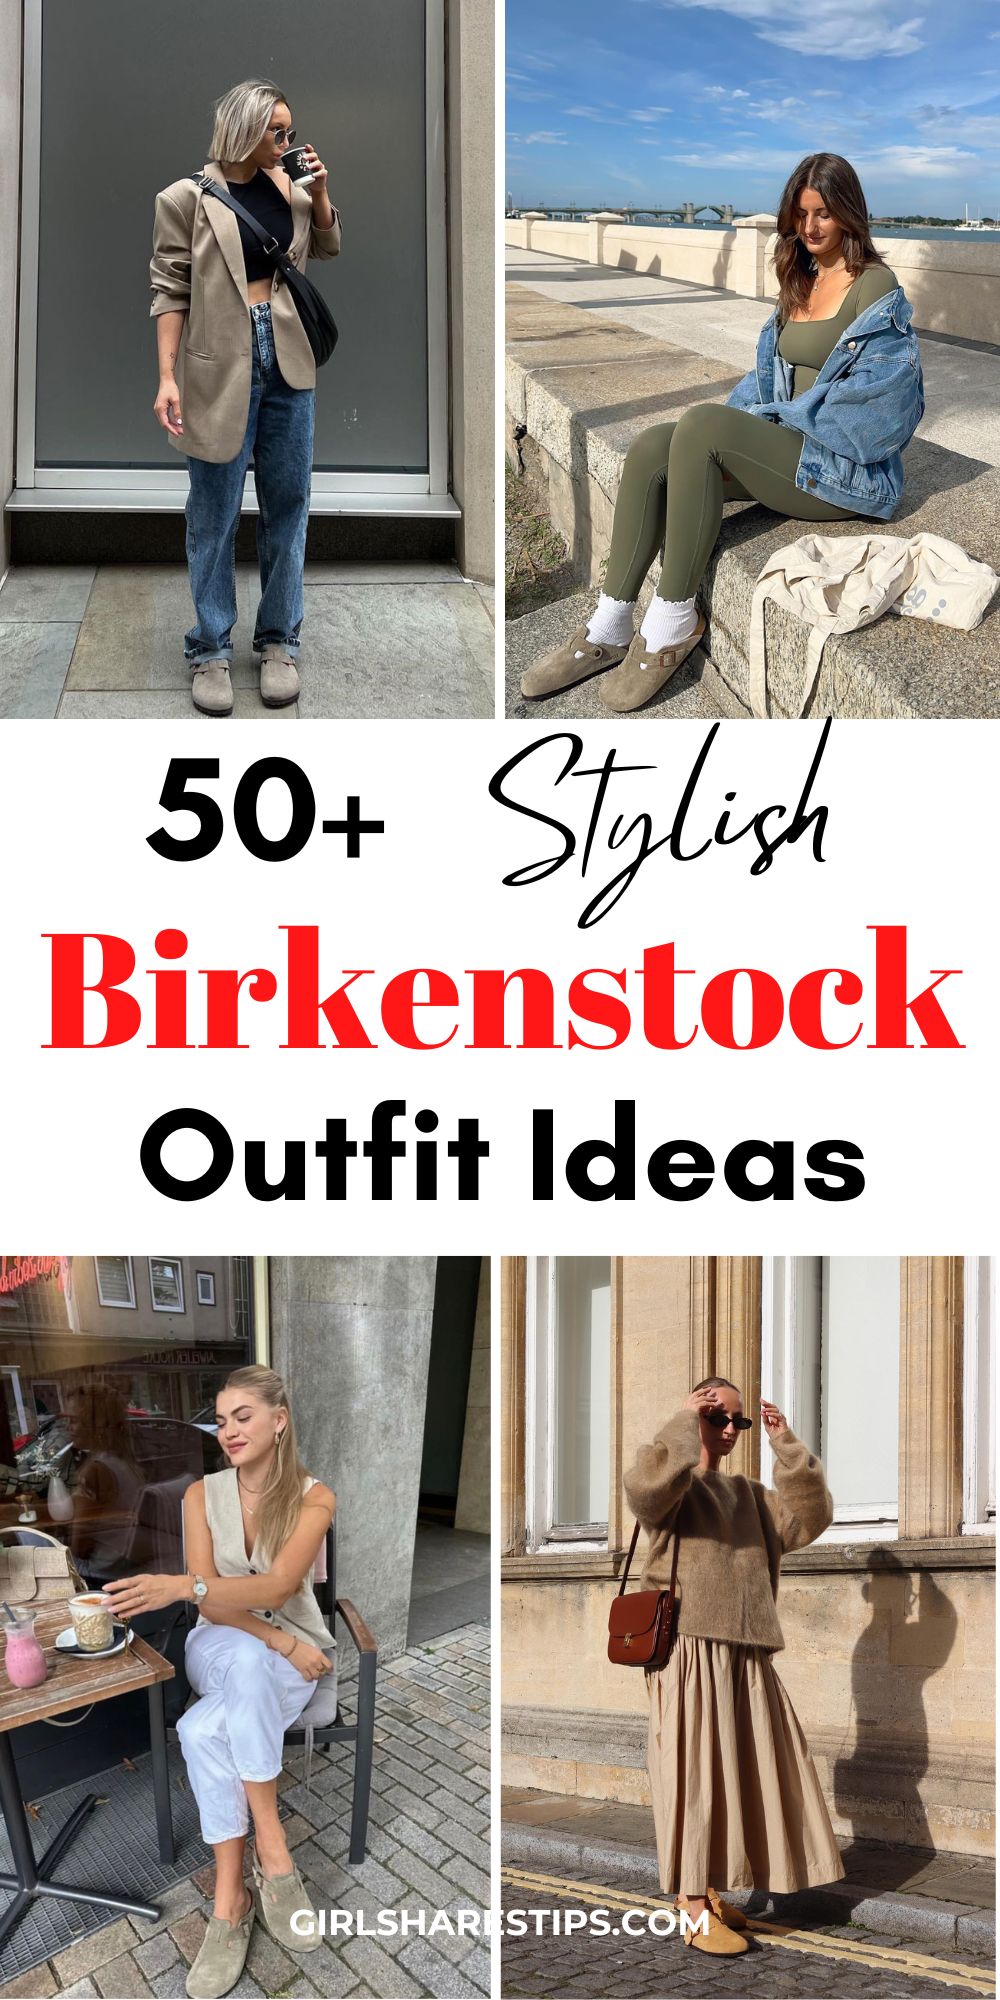 Birkenstock clogs outfit ideas for women collage